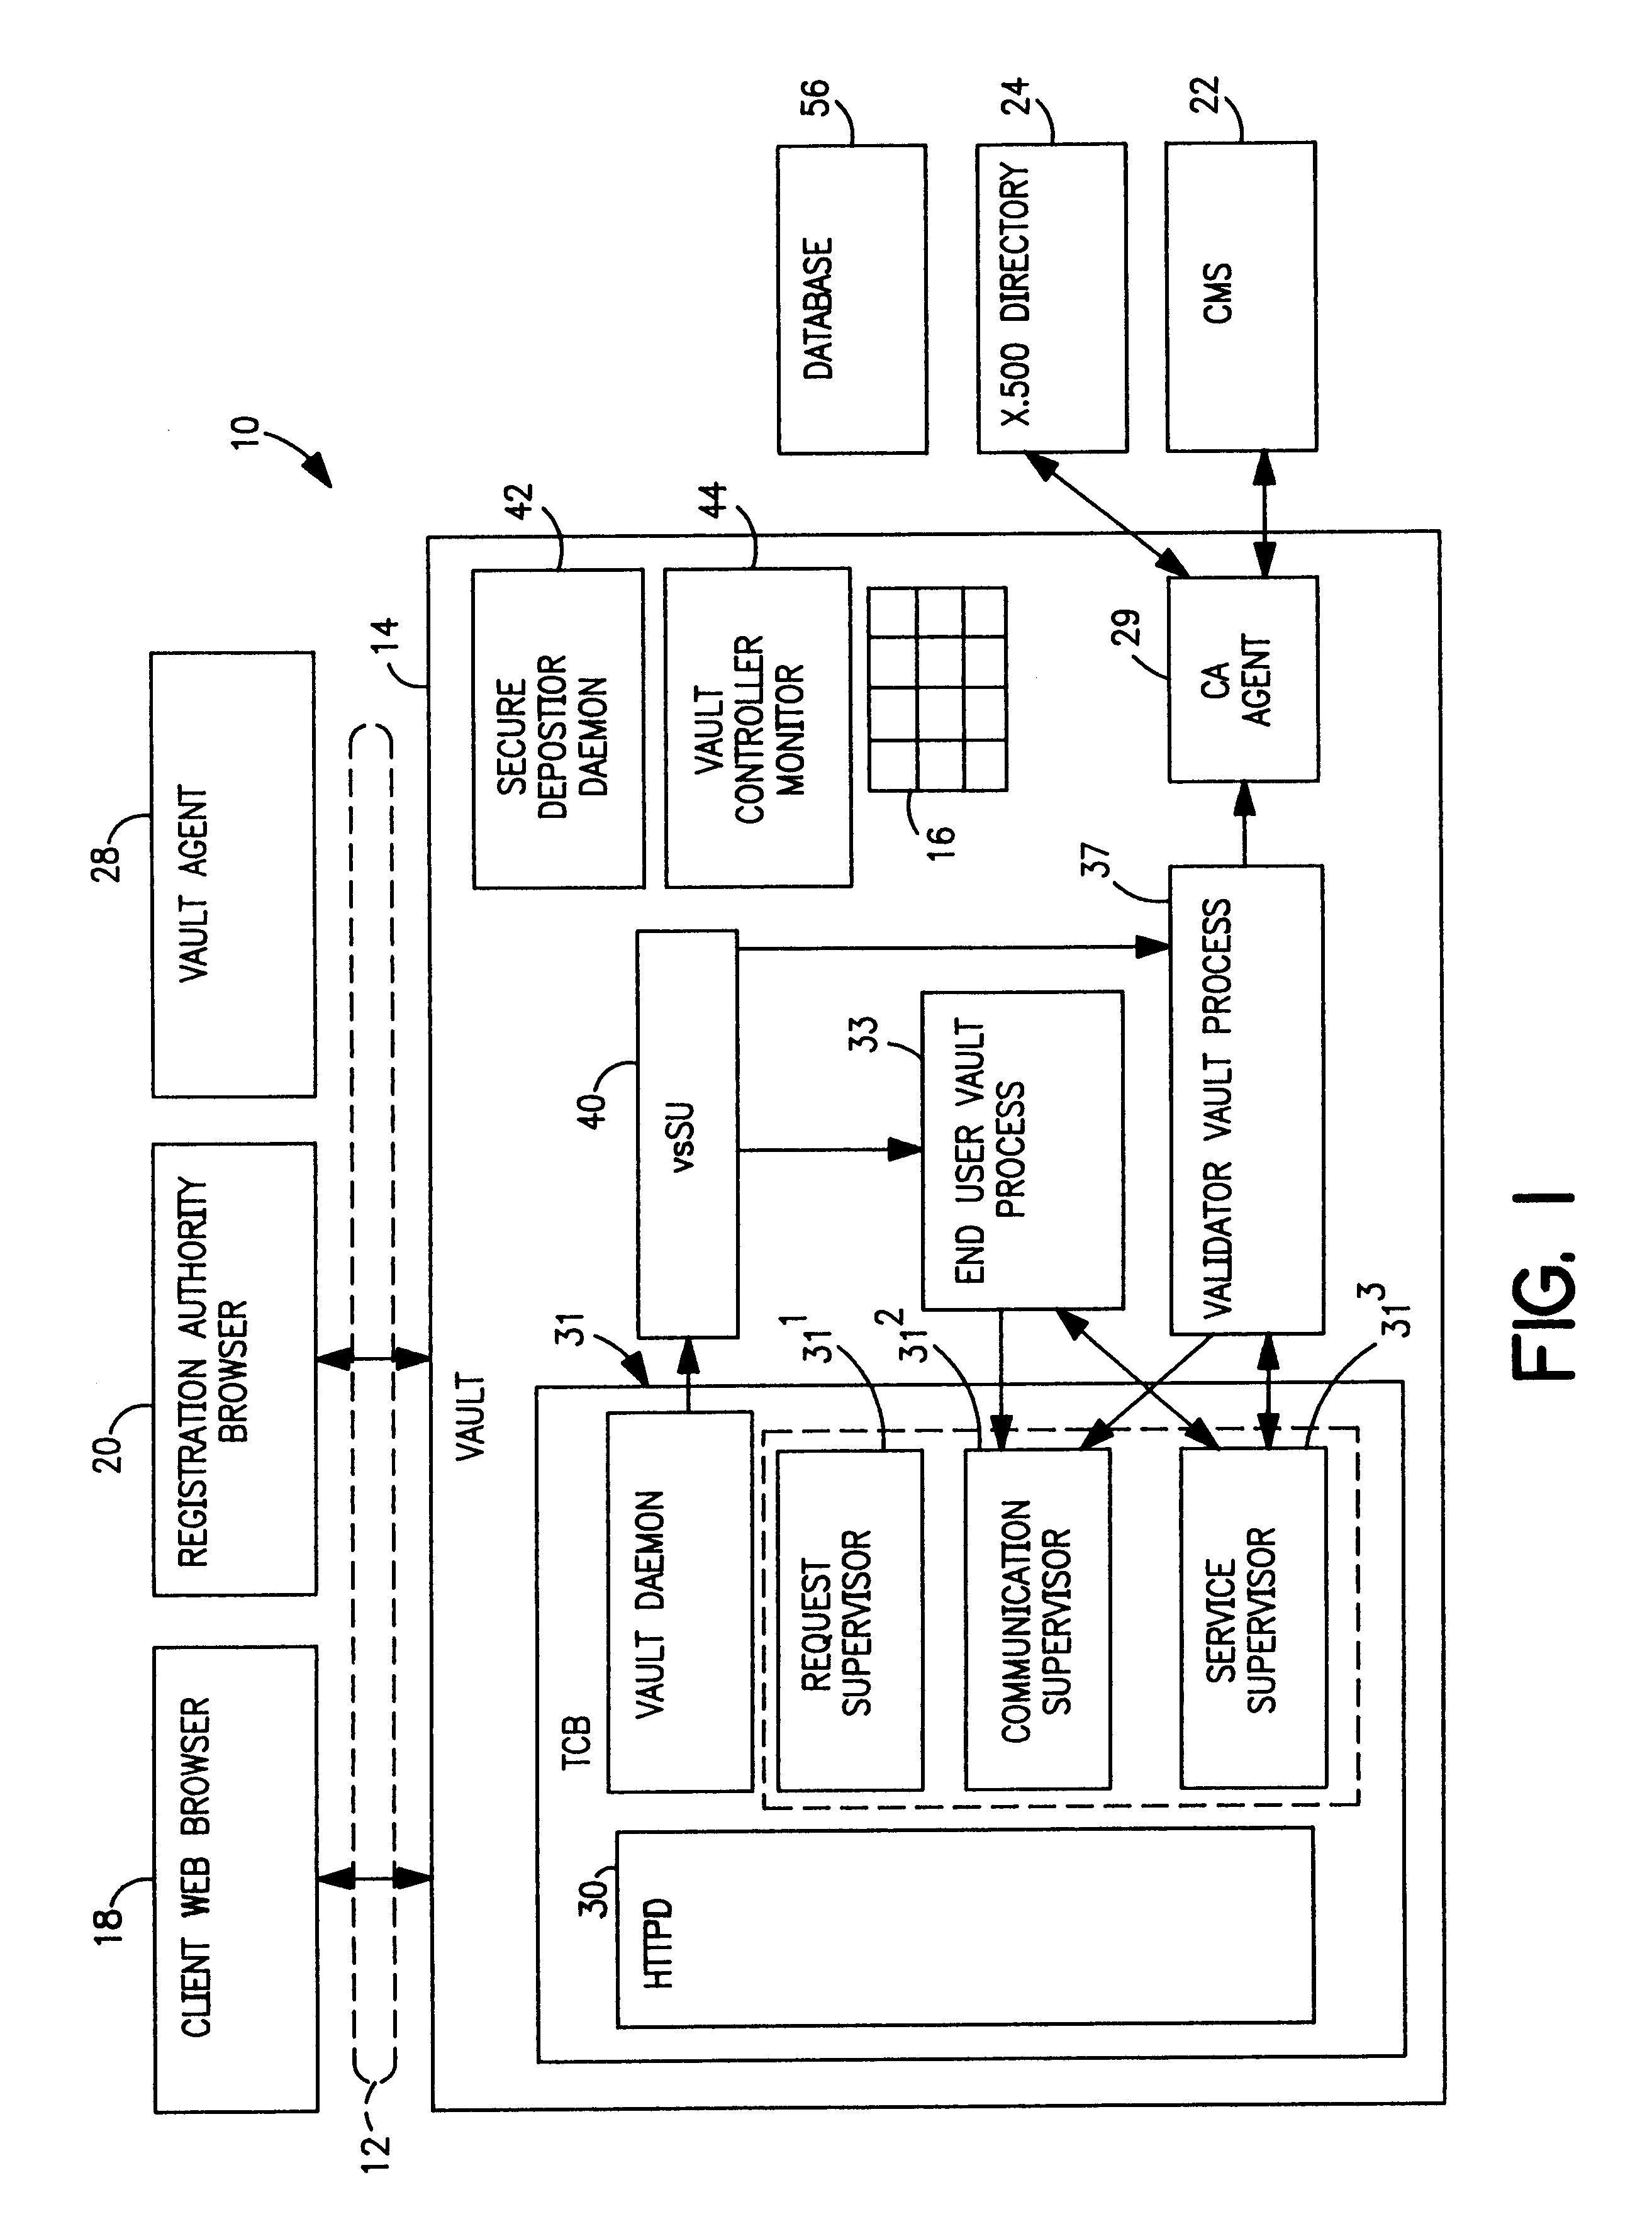 Vault controller dispatcher and methods of operation for handling interaction between browser sessions and vault processes in electronic business systems